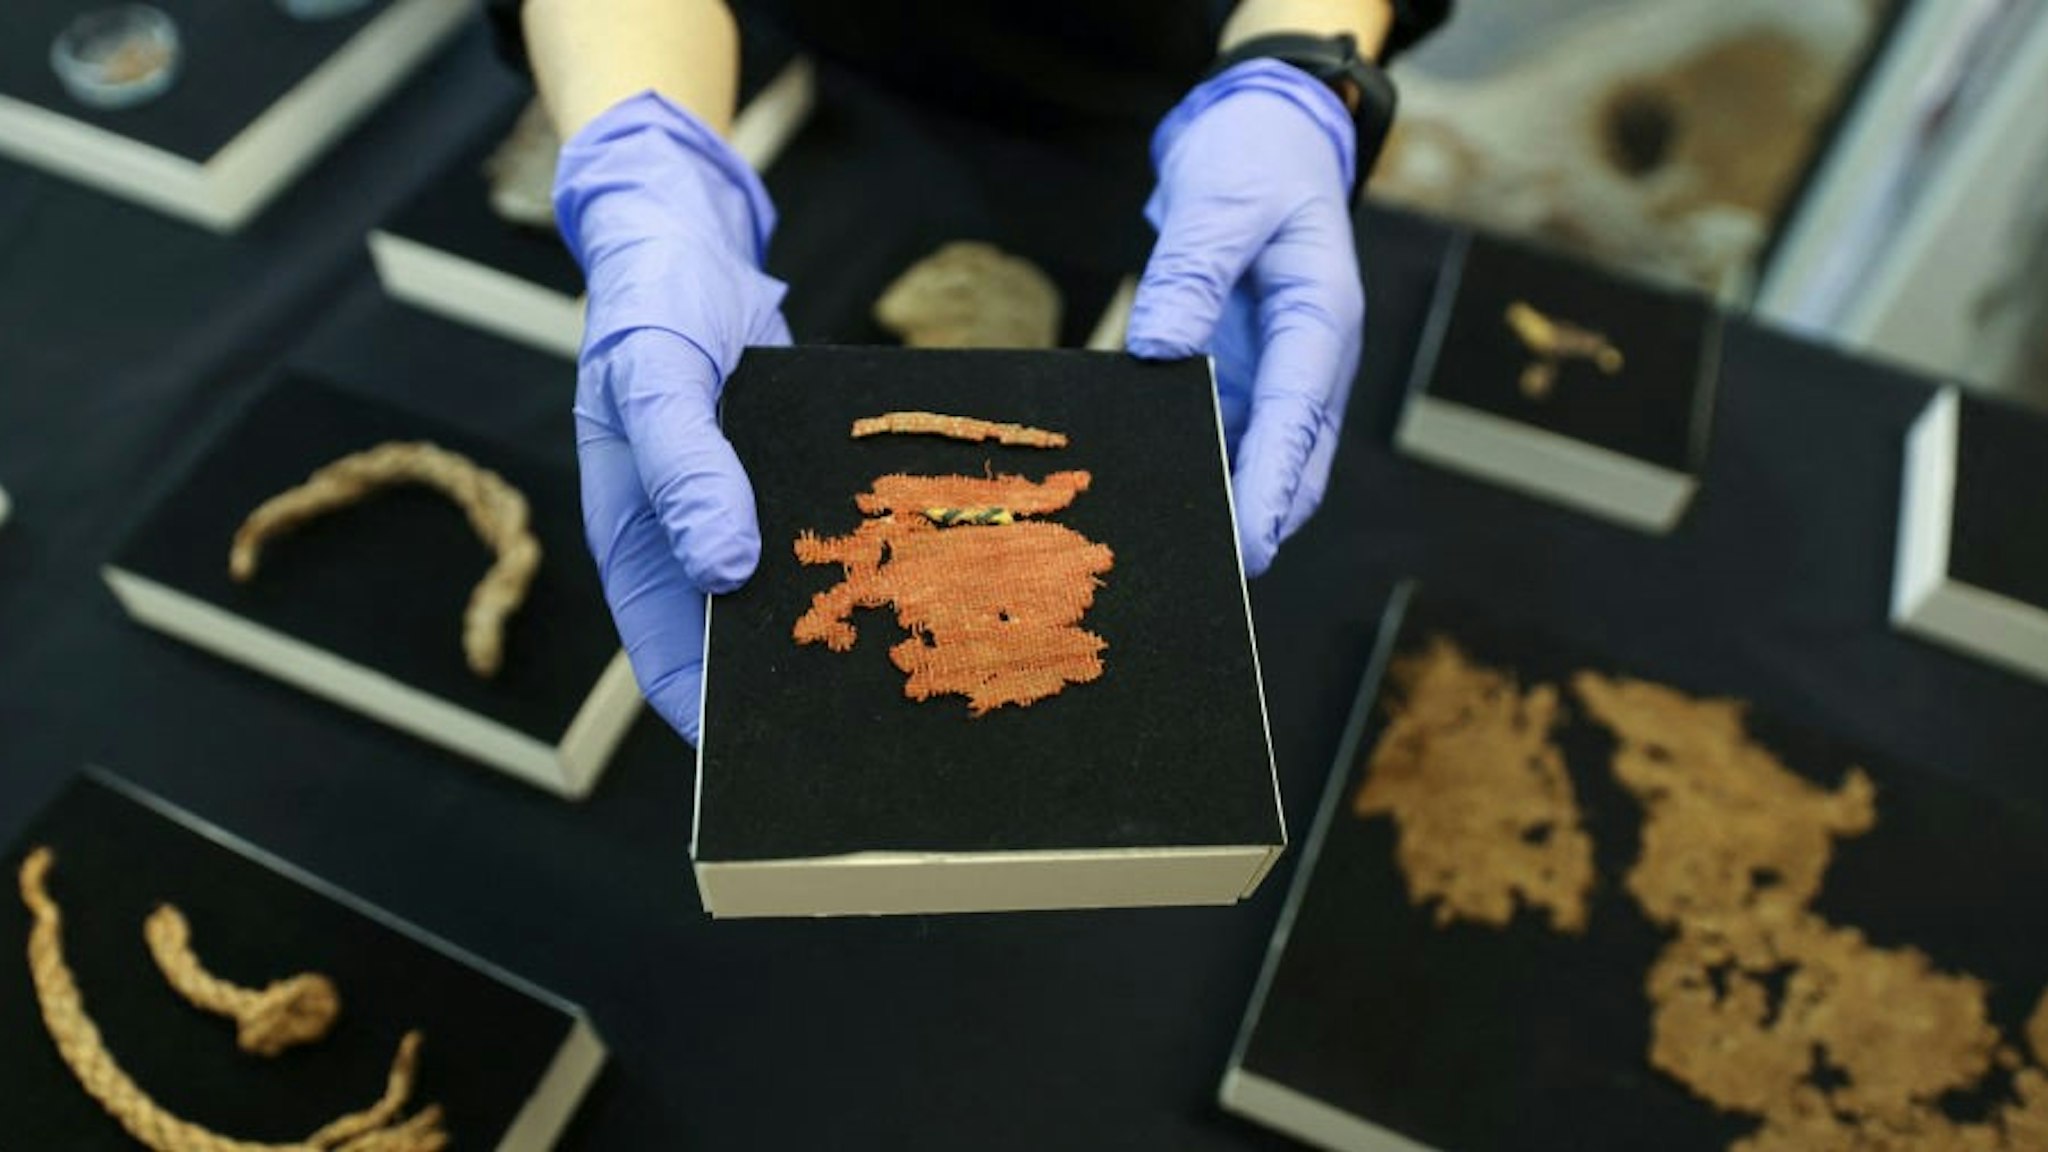 An archaeologist at the Israel Antiquities Authority (IAA) shows a cloth fragment from the Bar Kochba Jewish revolt period dating back to 132136 CE, excavated from an area in the Judean Desert, after conservation work is done at the IAA's Dead Sea conservation laboratory in Jerusalem, on March 16, 2021. - Israel described the find, which includes a cache of rare coins, a six-millennia-old skeleton of a child and basket it described as the oldest in the world, at over 10,000 years, as one of the most significant since the Dead Sea Scrolls. The fragments, found following a survey in a desert area spanning southern Israel and the occupied West Bank, include passages in Greek from the Book of the Twelve Minor Prophets including the books of Zechariah and Nahum, the IAA said. (Photo by MENAHEM KAHANA / AFP) (Photo by